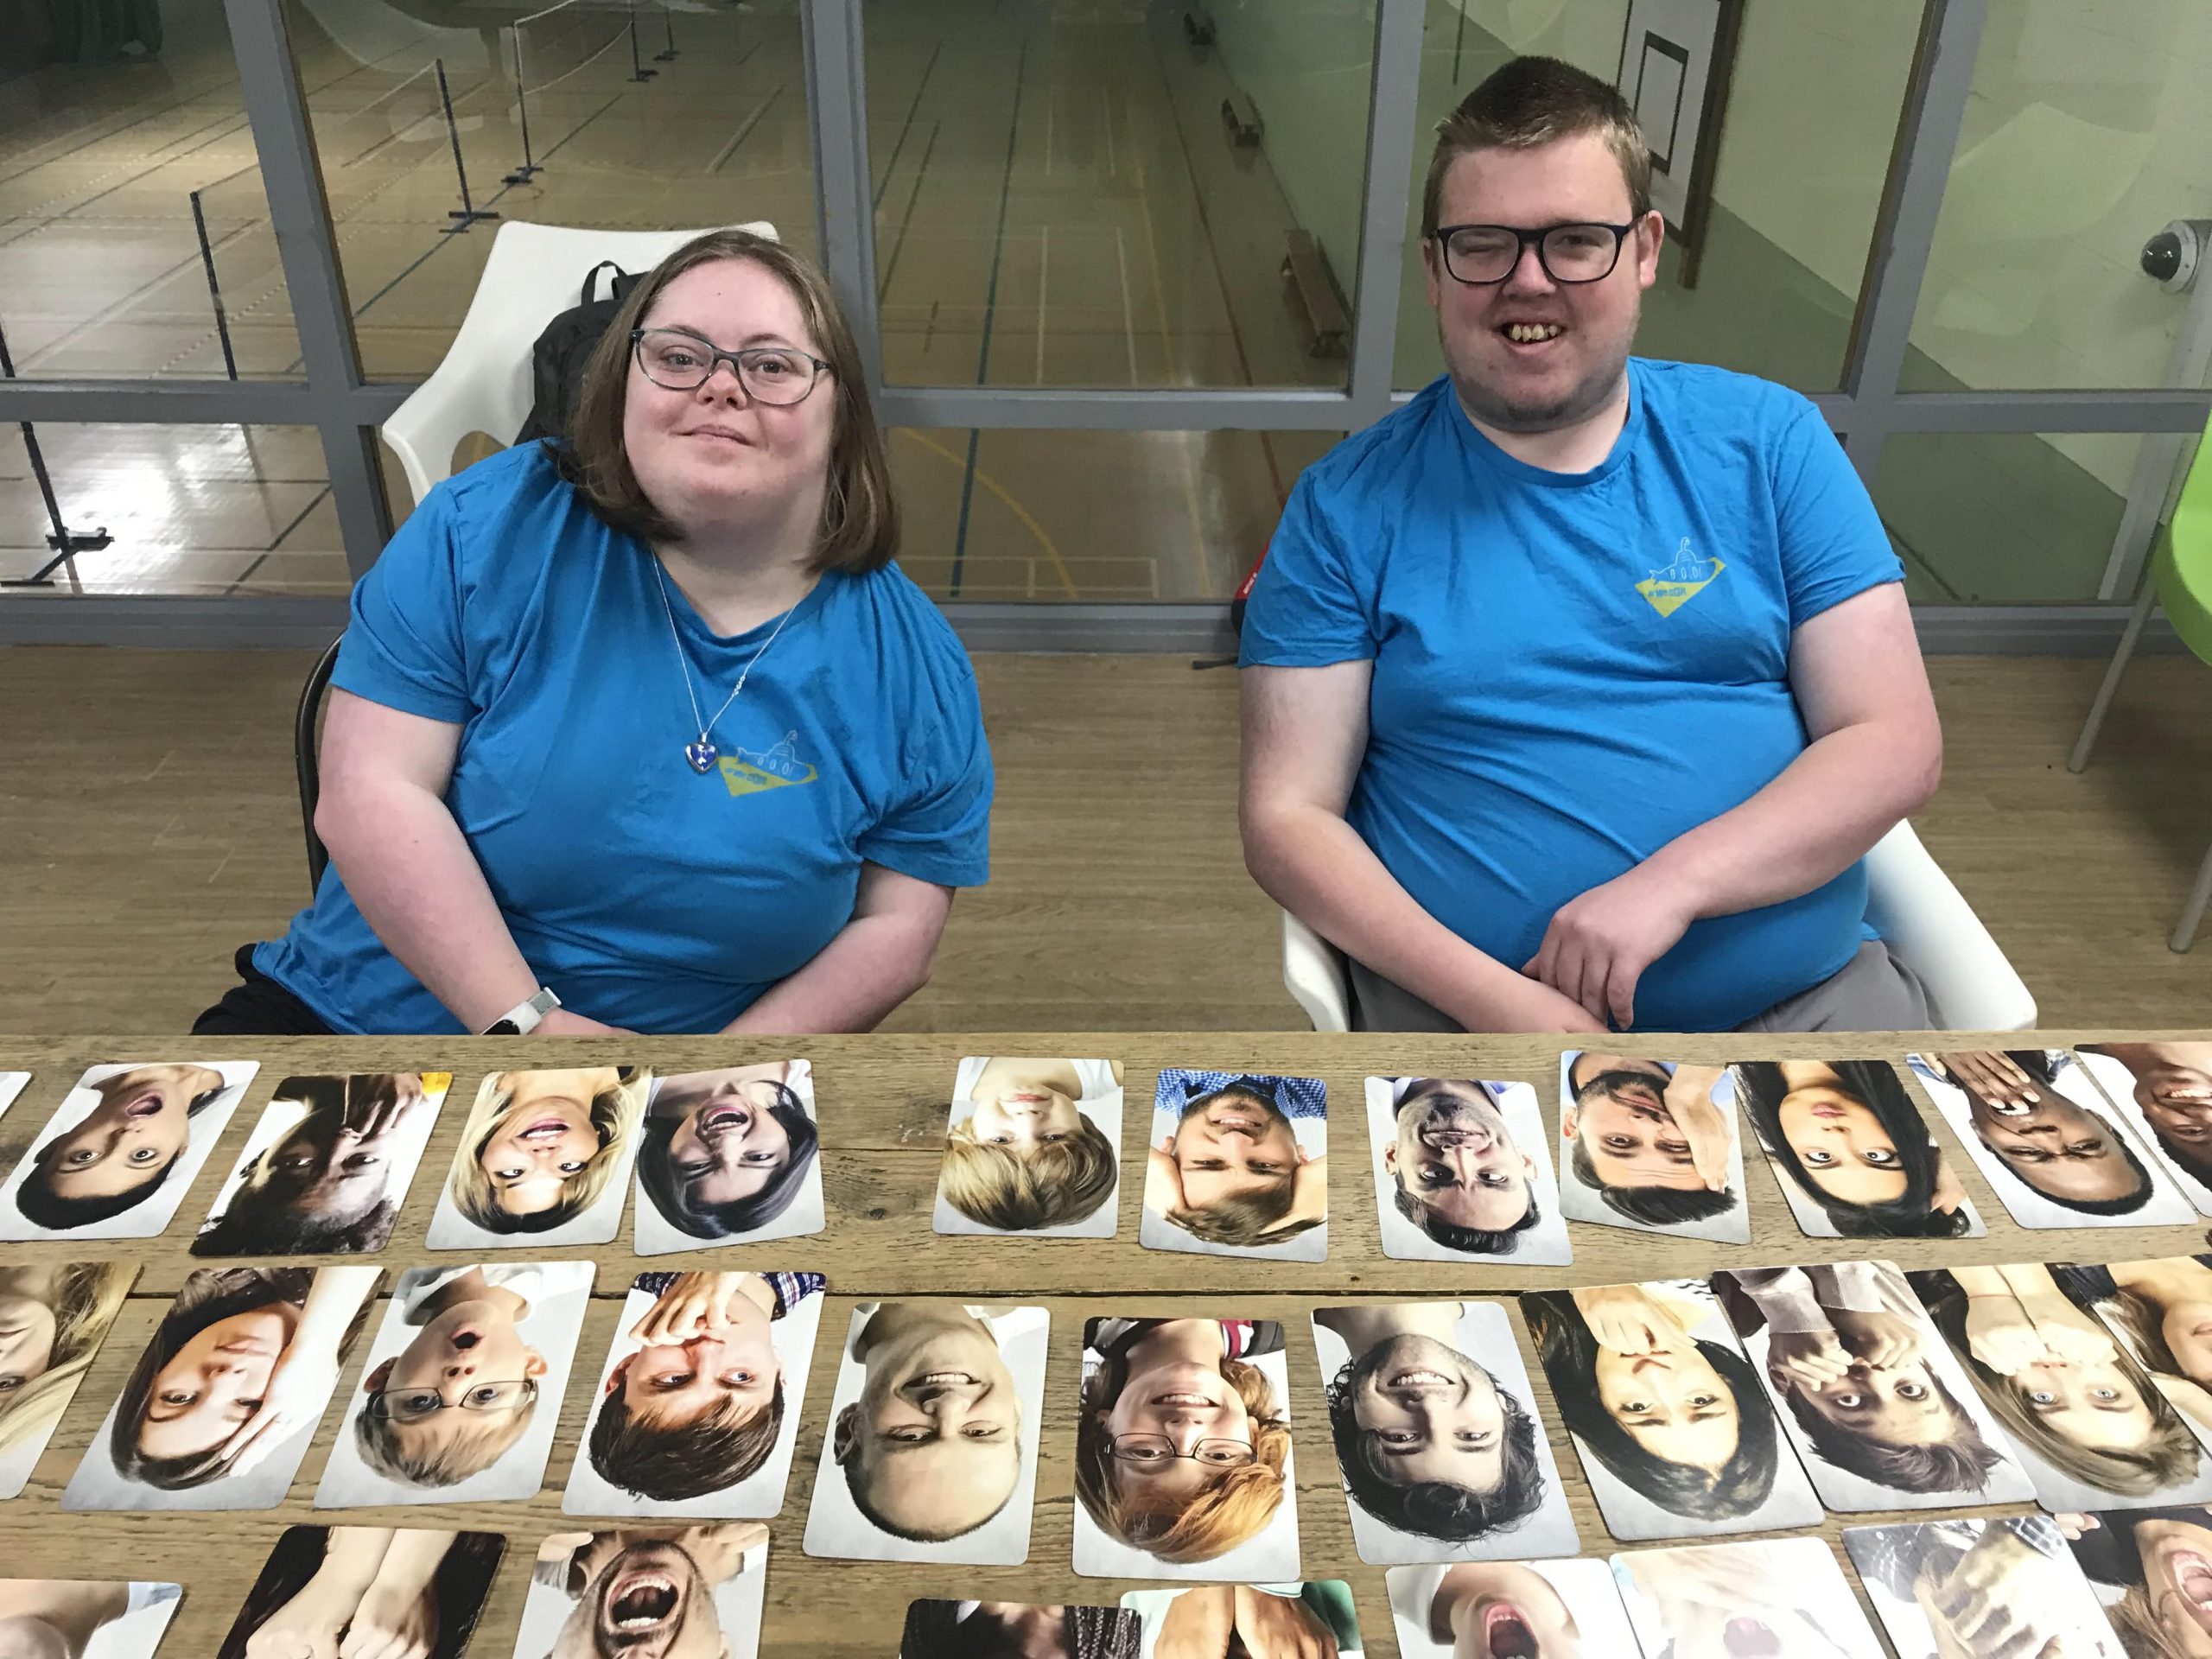 two people wearing blue t-shirt (the yellow submarine branded t shirts) are sitting behind a table. On the table they have cards with printed faces on them